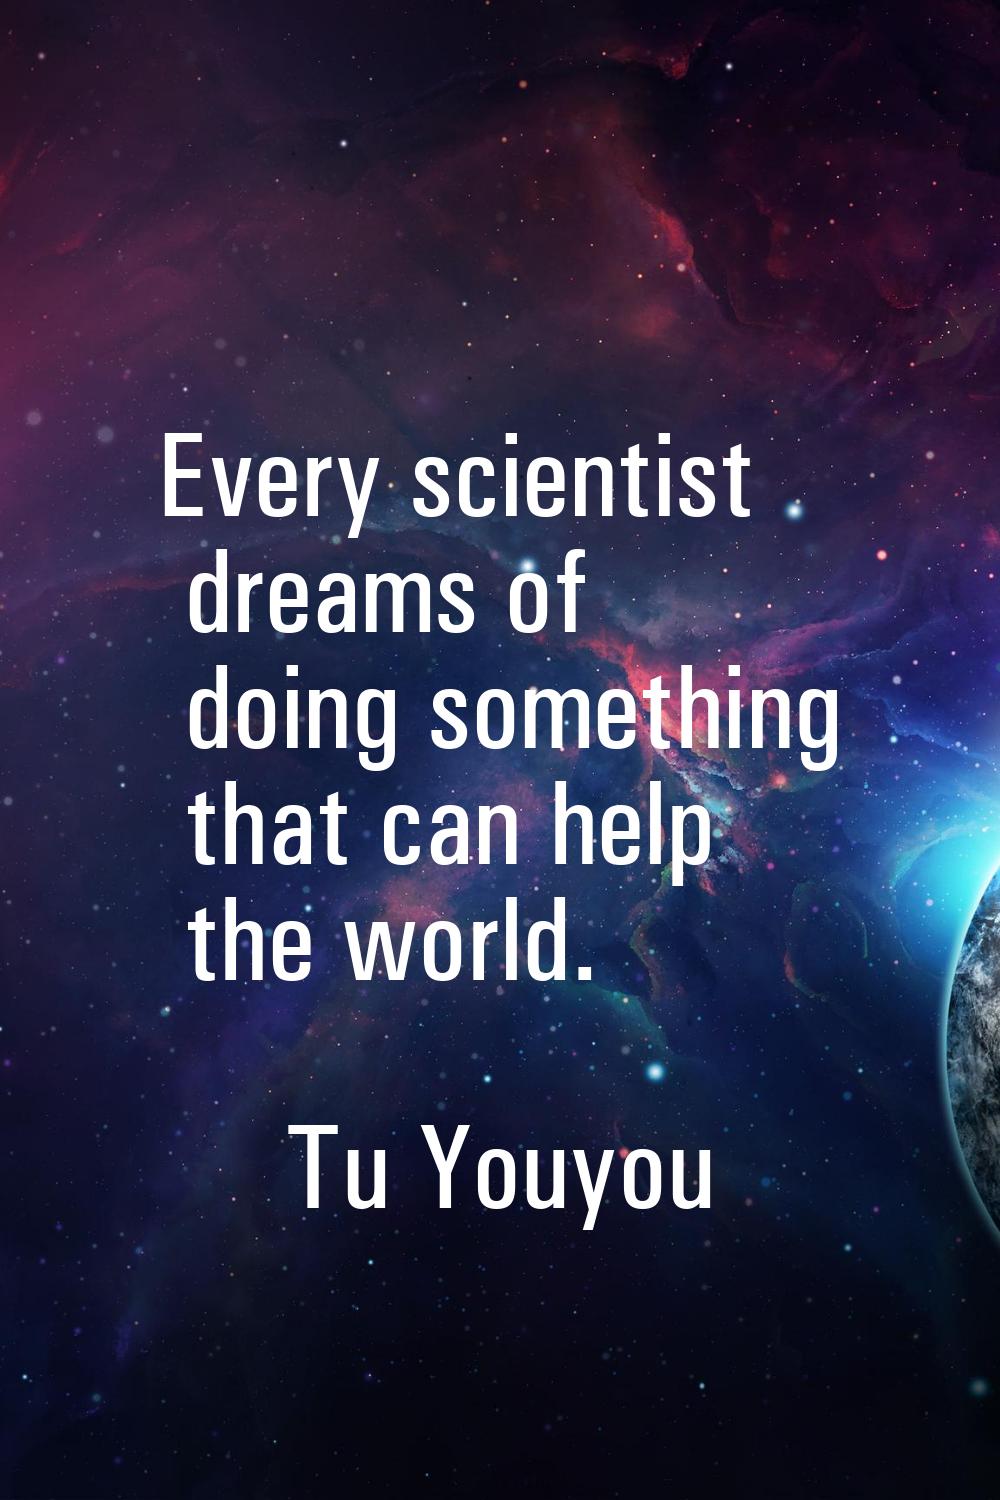 Every scientist dreams of doing something that can help the world.